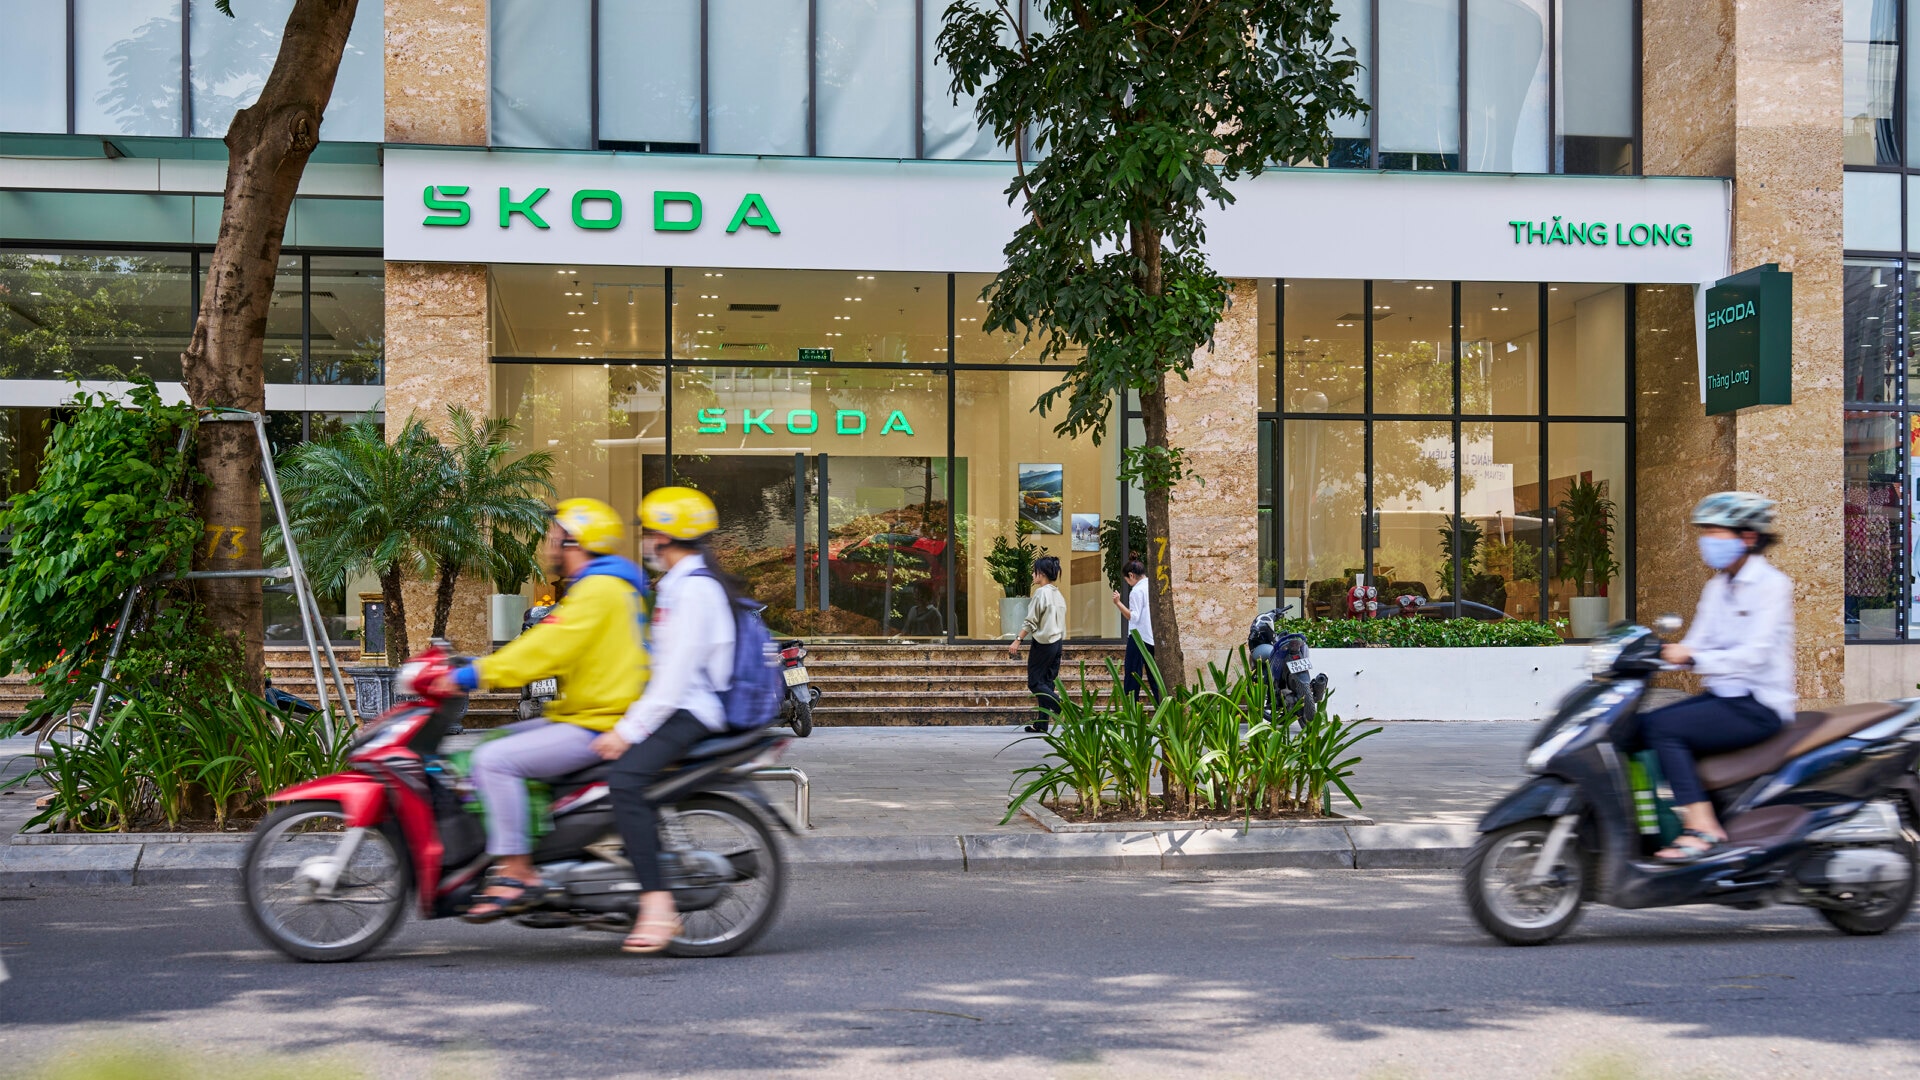 Skoda's first dealership in Vietnam is located in the capital city of Hanoi with 20 more outlets planned by 2025 and 30 by 2028